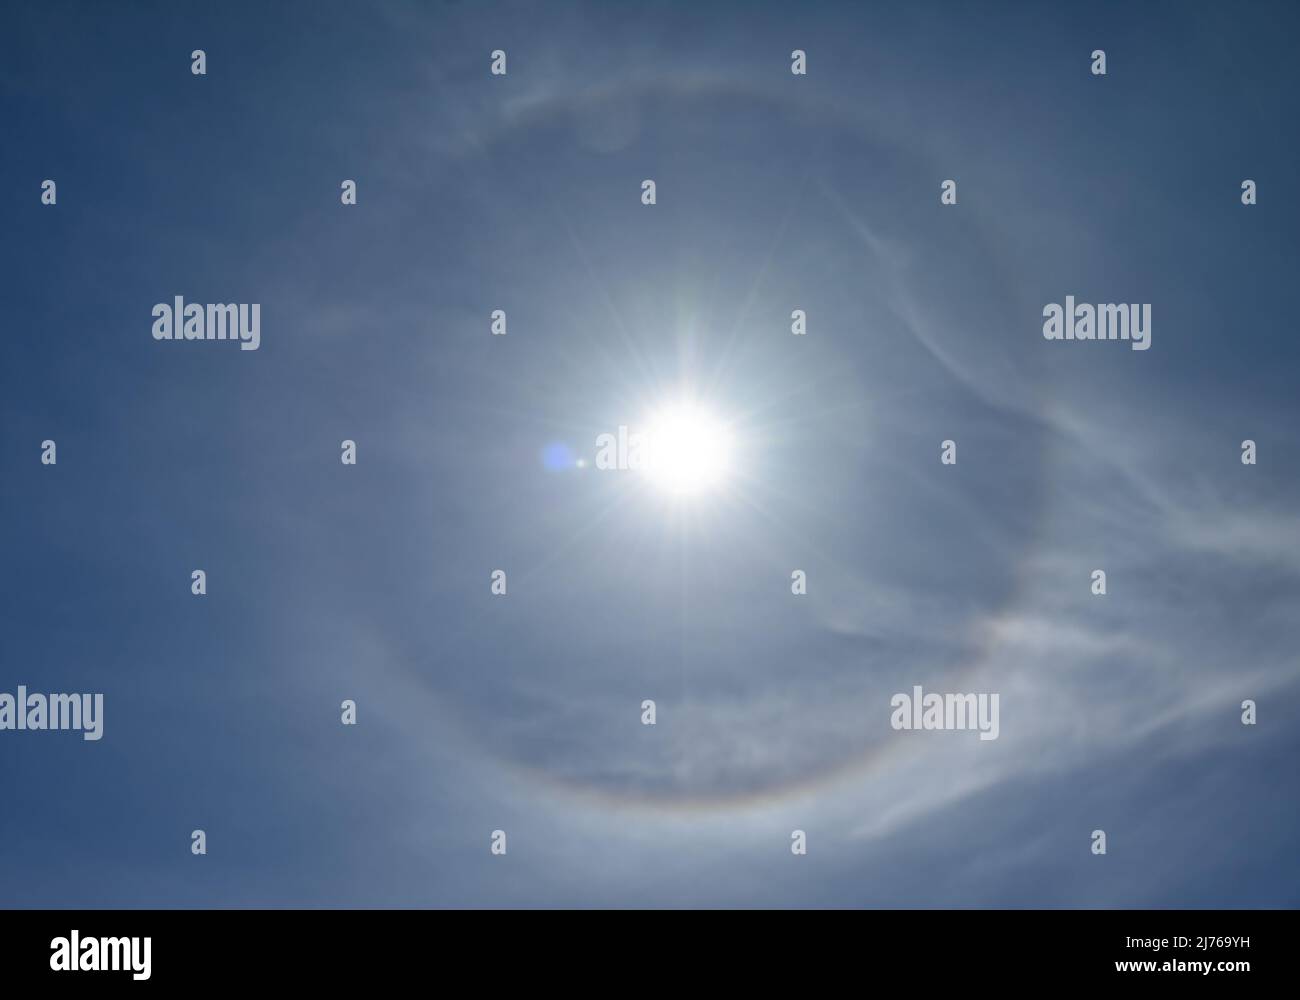 Optical phenomenon called 22 degree halo around the sun. Ice crystals in the atmosphere refract light and create the halo. Stock Photo